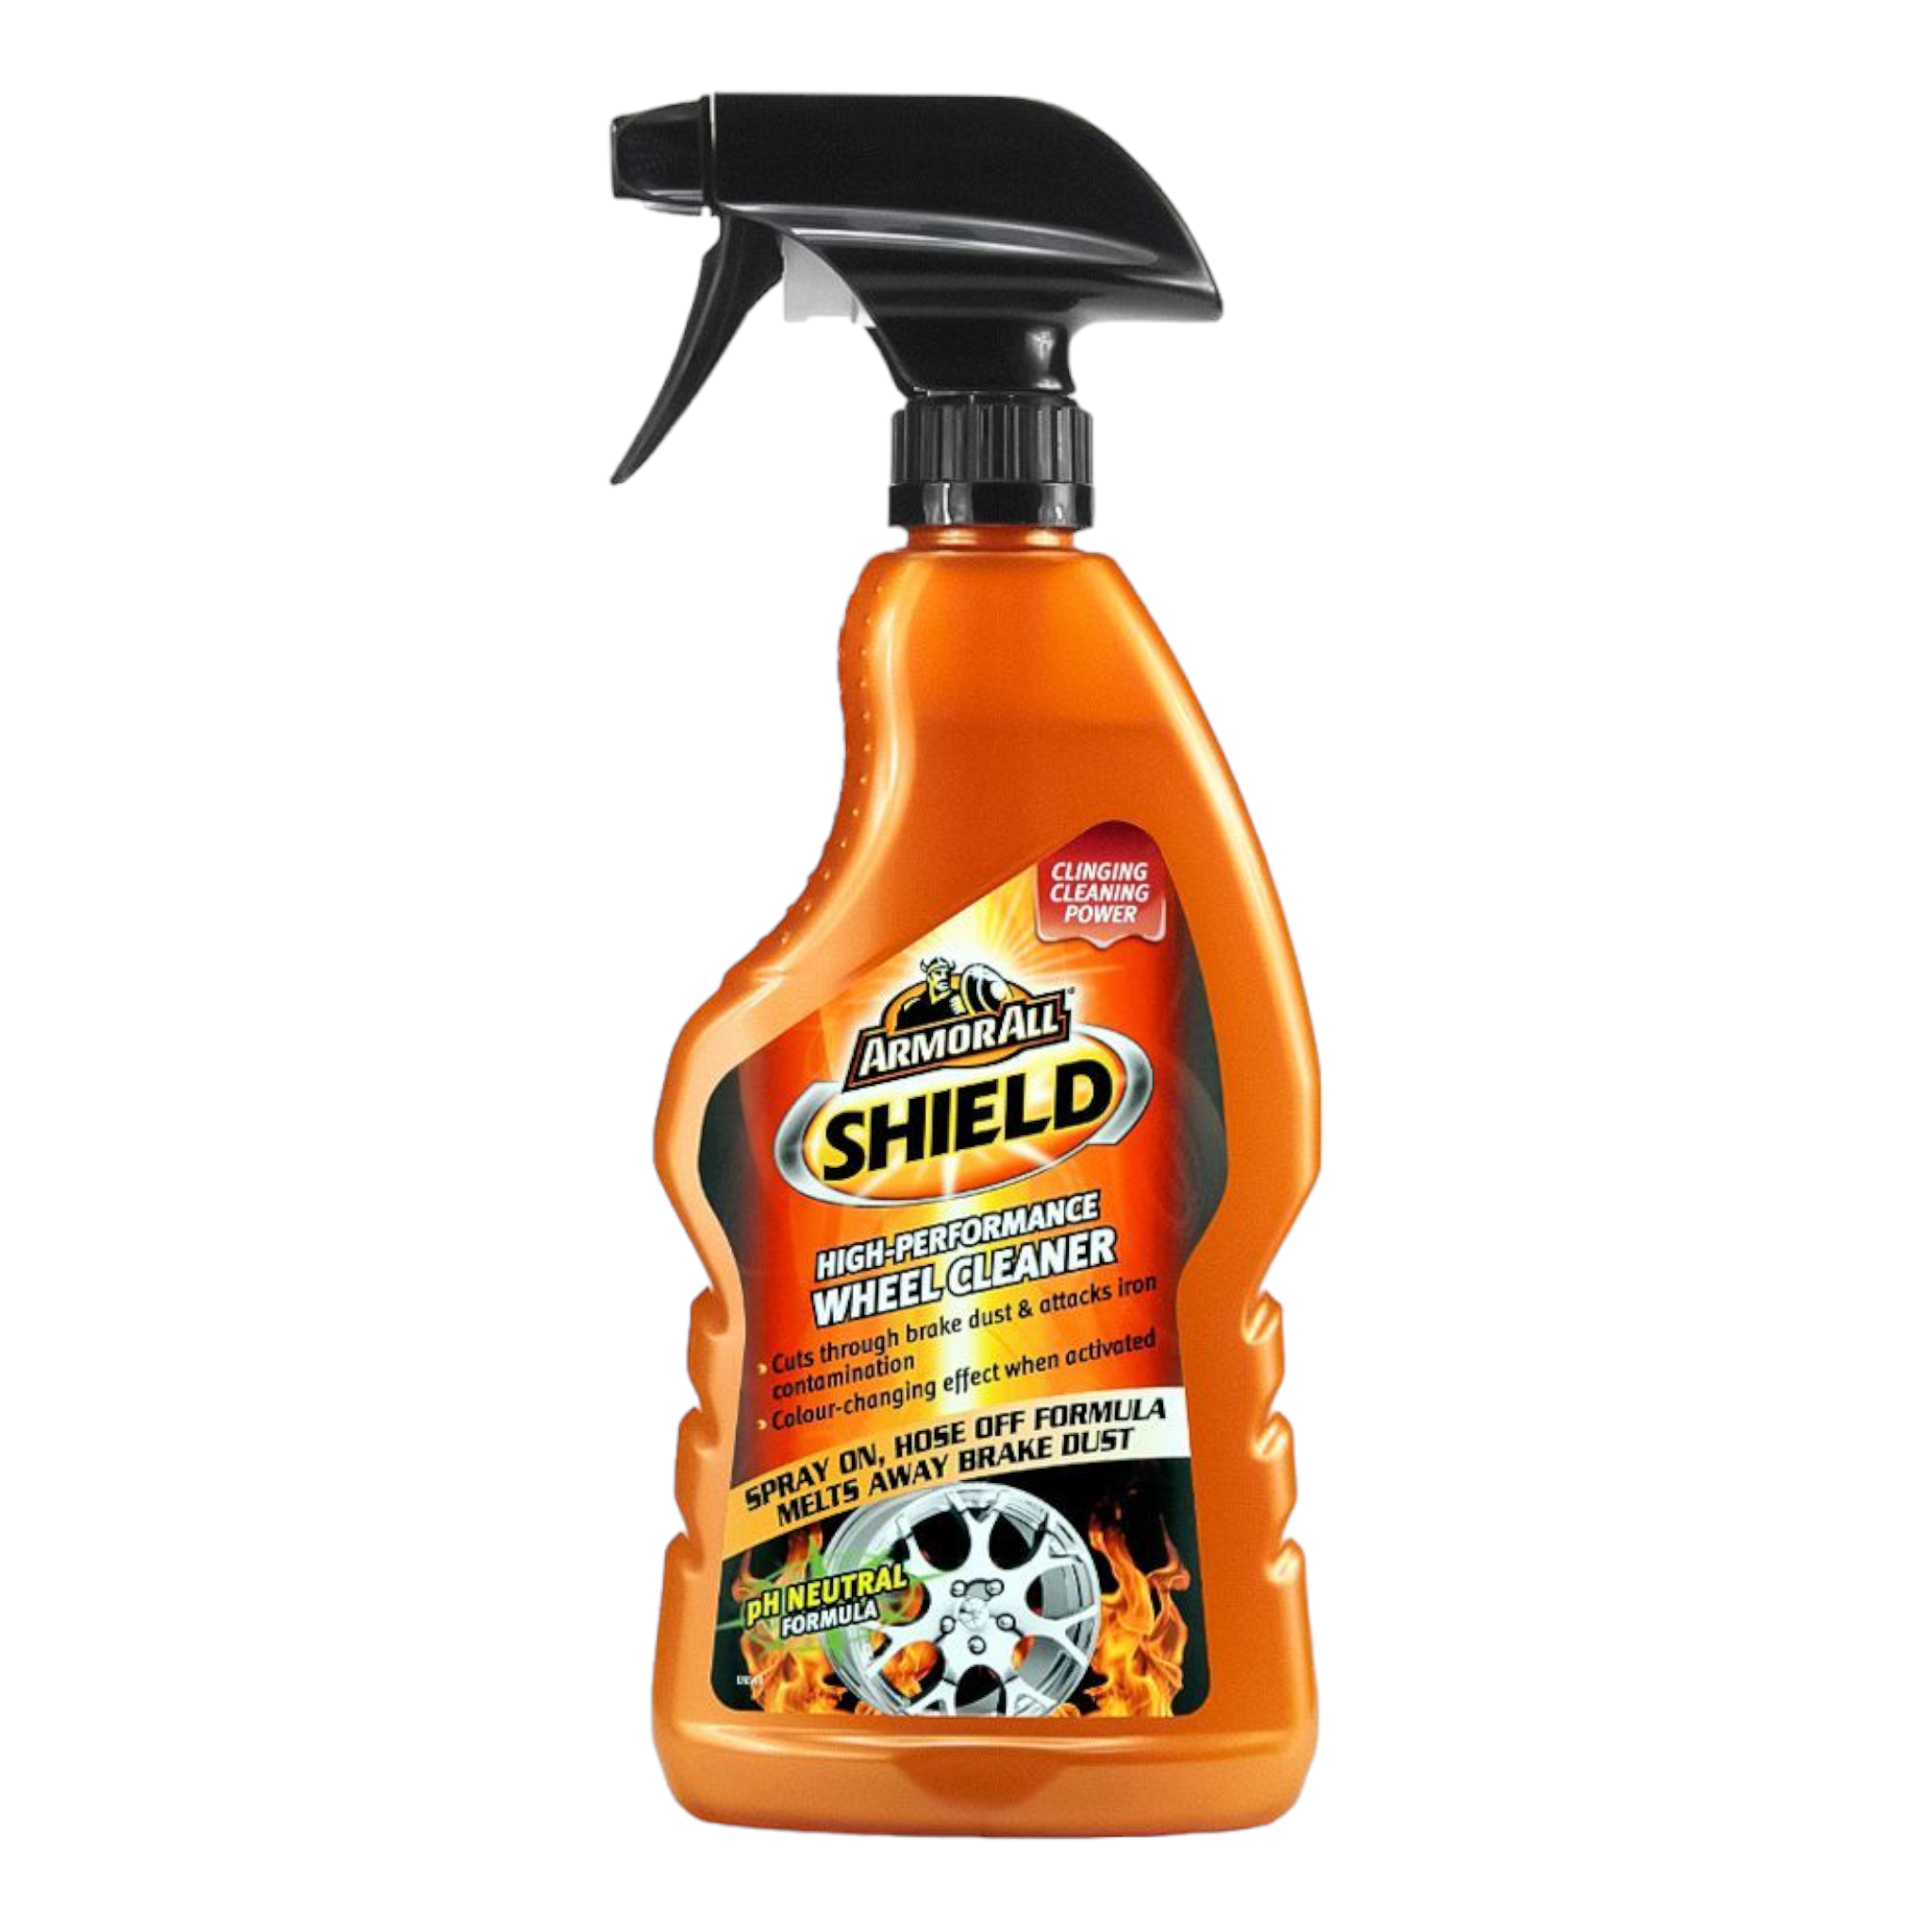 Armorall Shield Wheel Cleaner